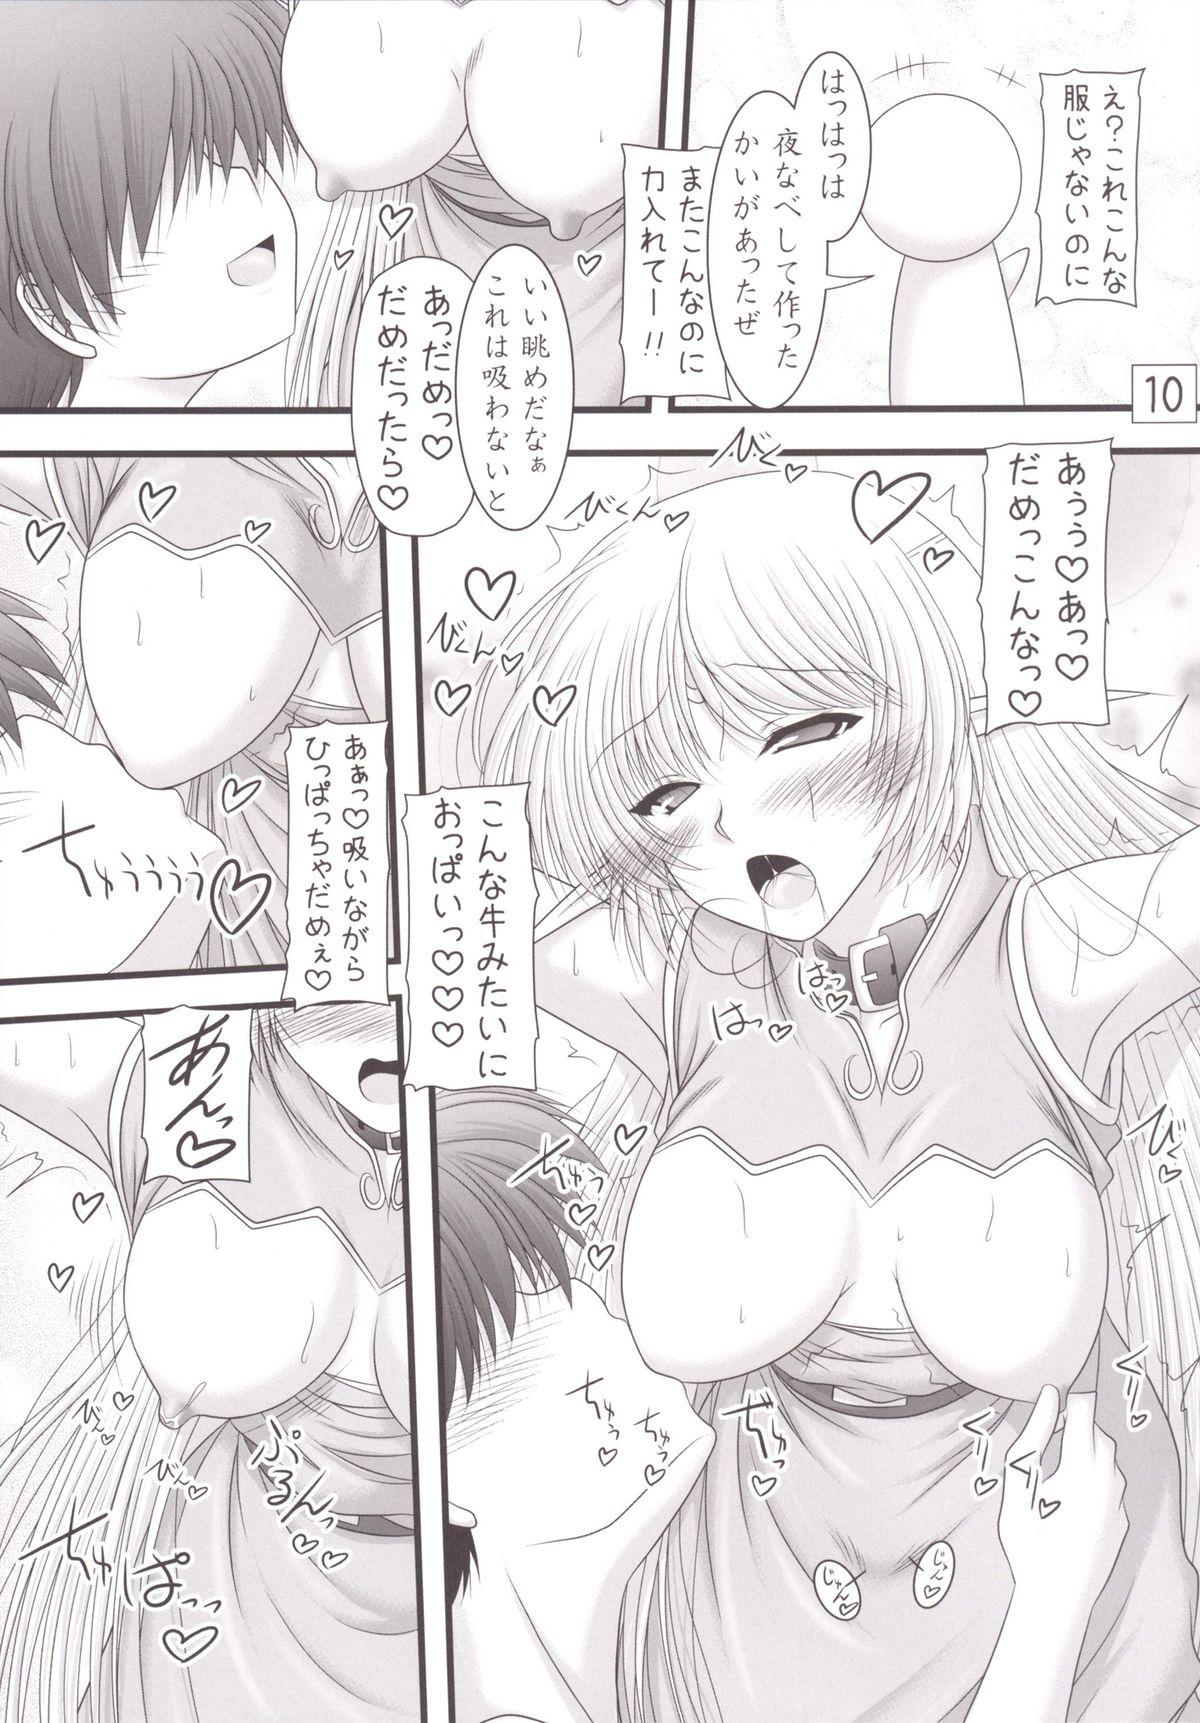 Bra Moriyome - Record of lodoss war Girls Getting Fucked - Page 9